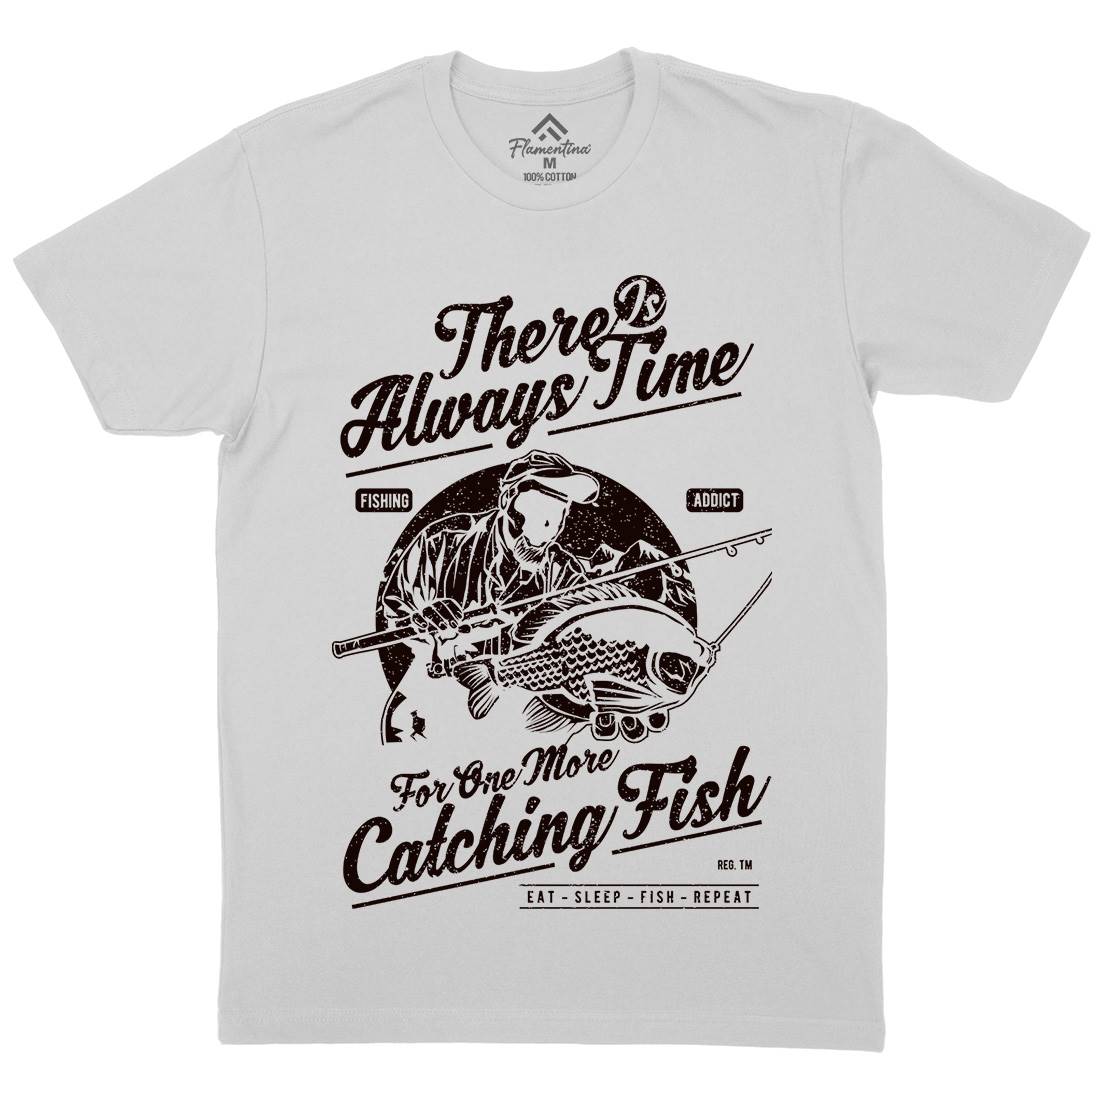 One More Catching Mens Crew Neck T-Shirt Fishing A731